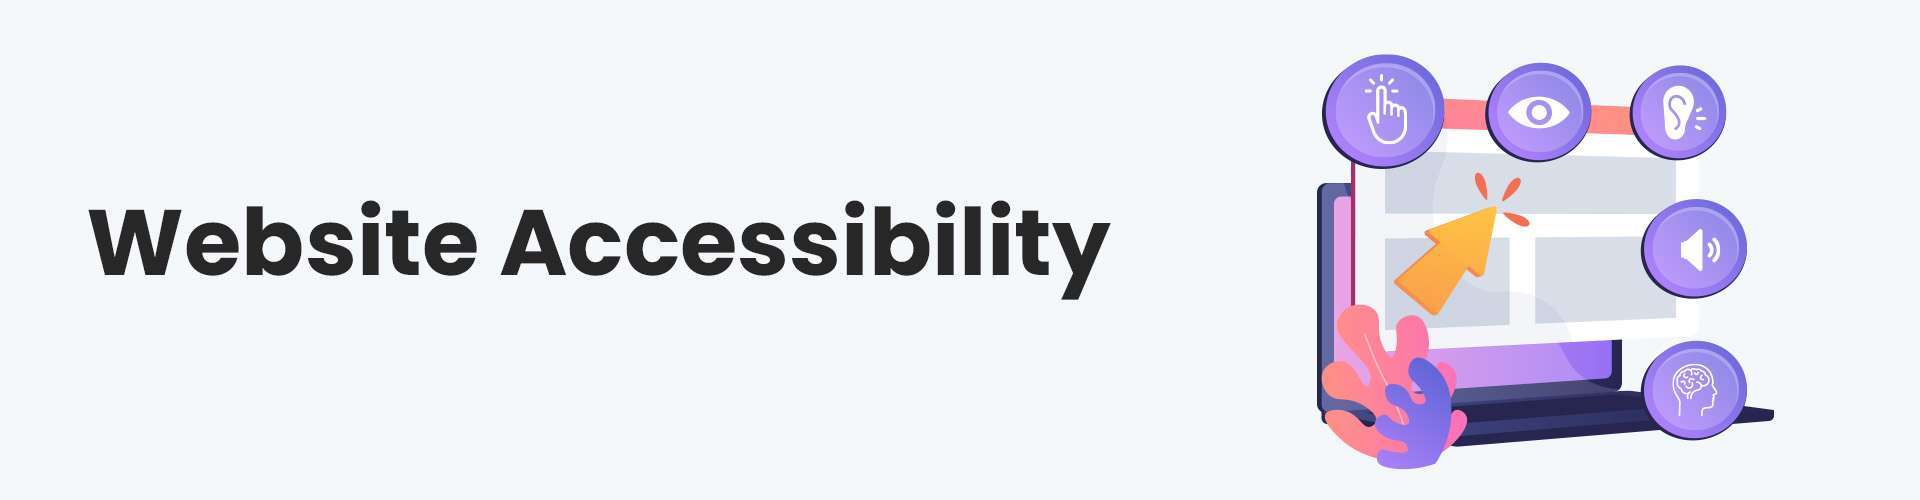 Website Accessibility Service